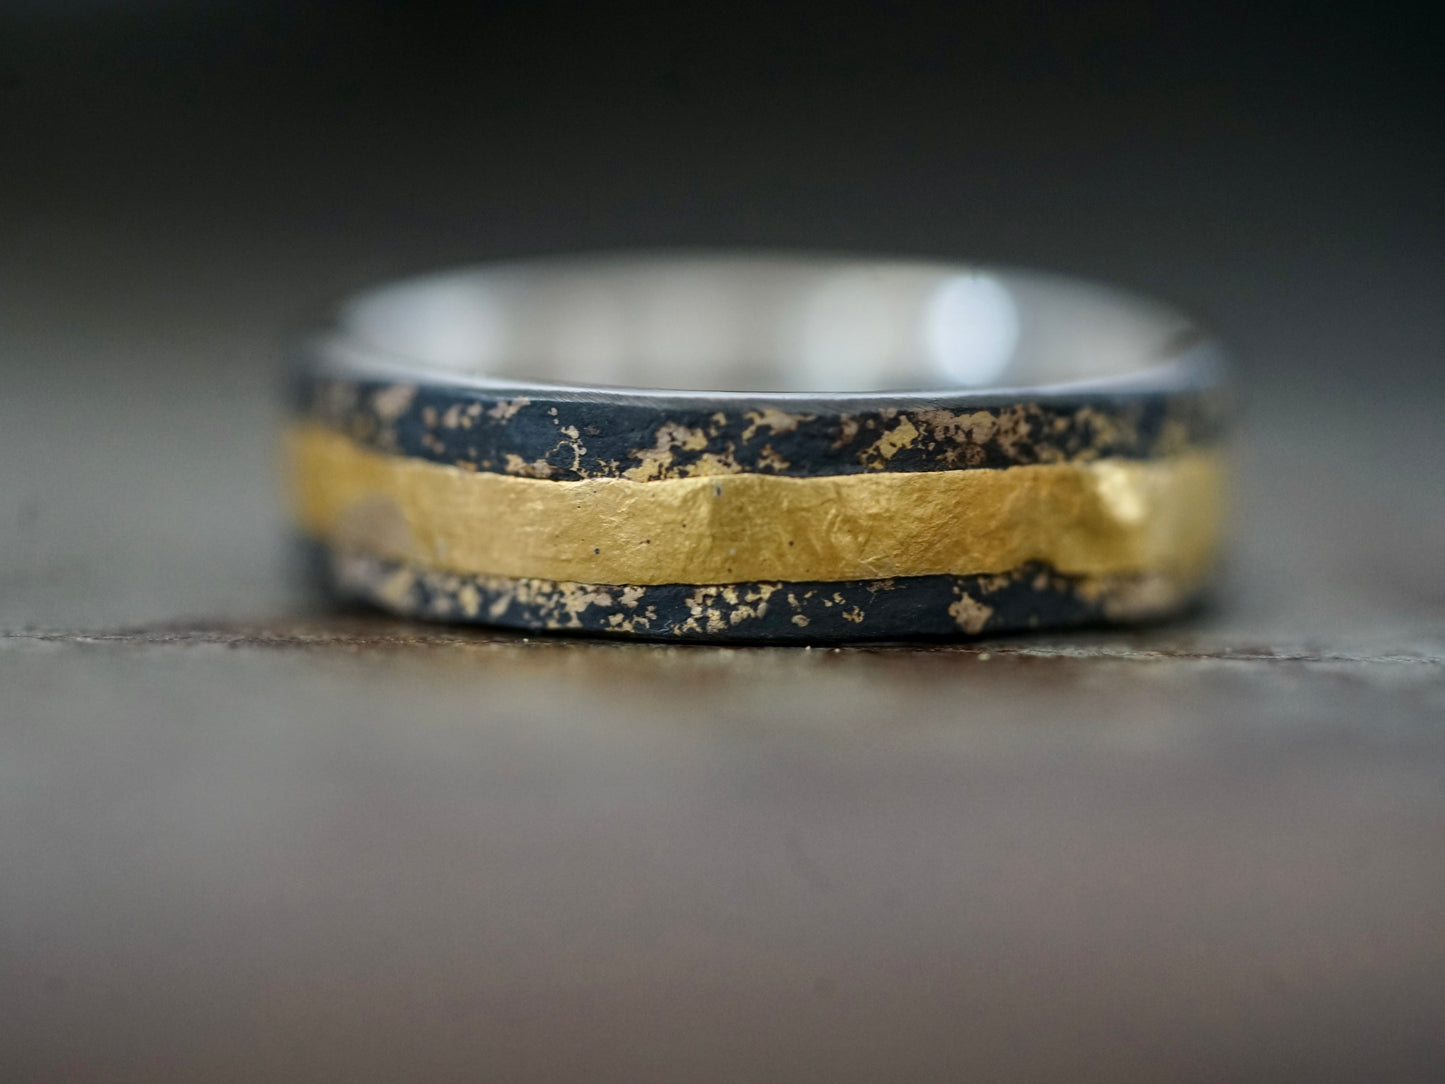 Alicja's ring, Midas with 18K gold band, size 9